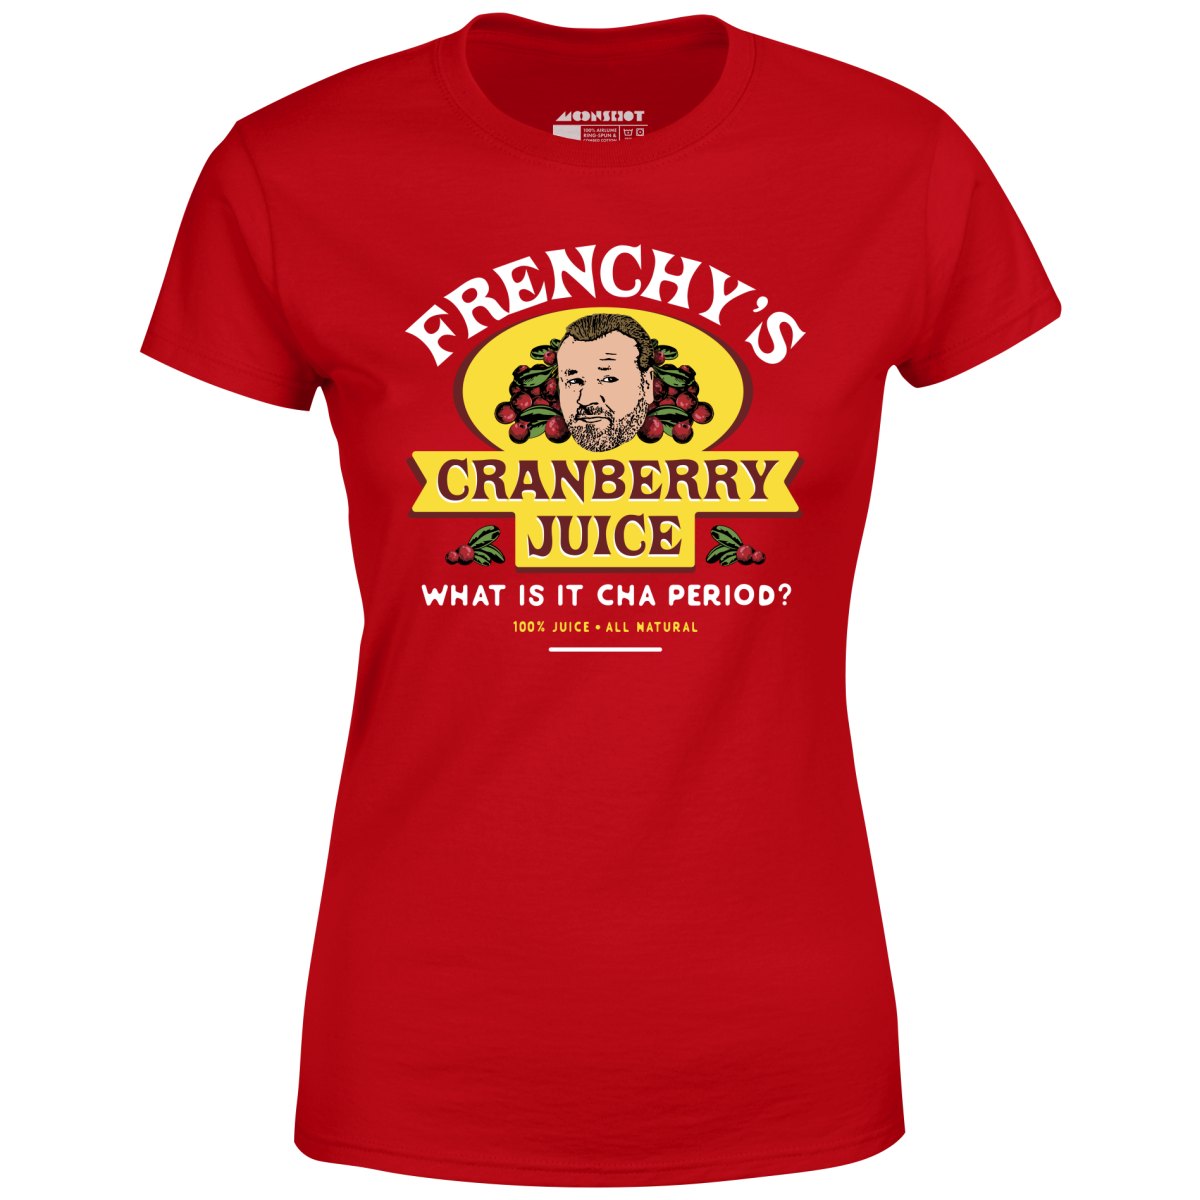 Frenchy's Cranberry Juice - The Departed - Women's T-Shirt